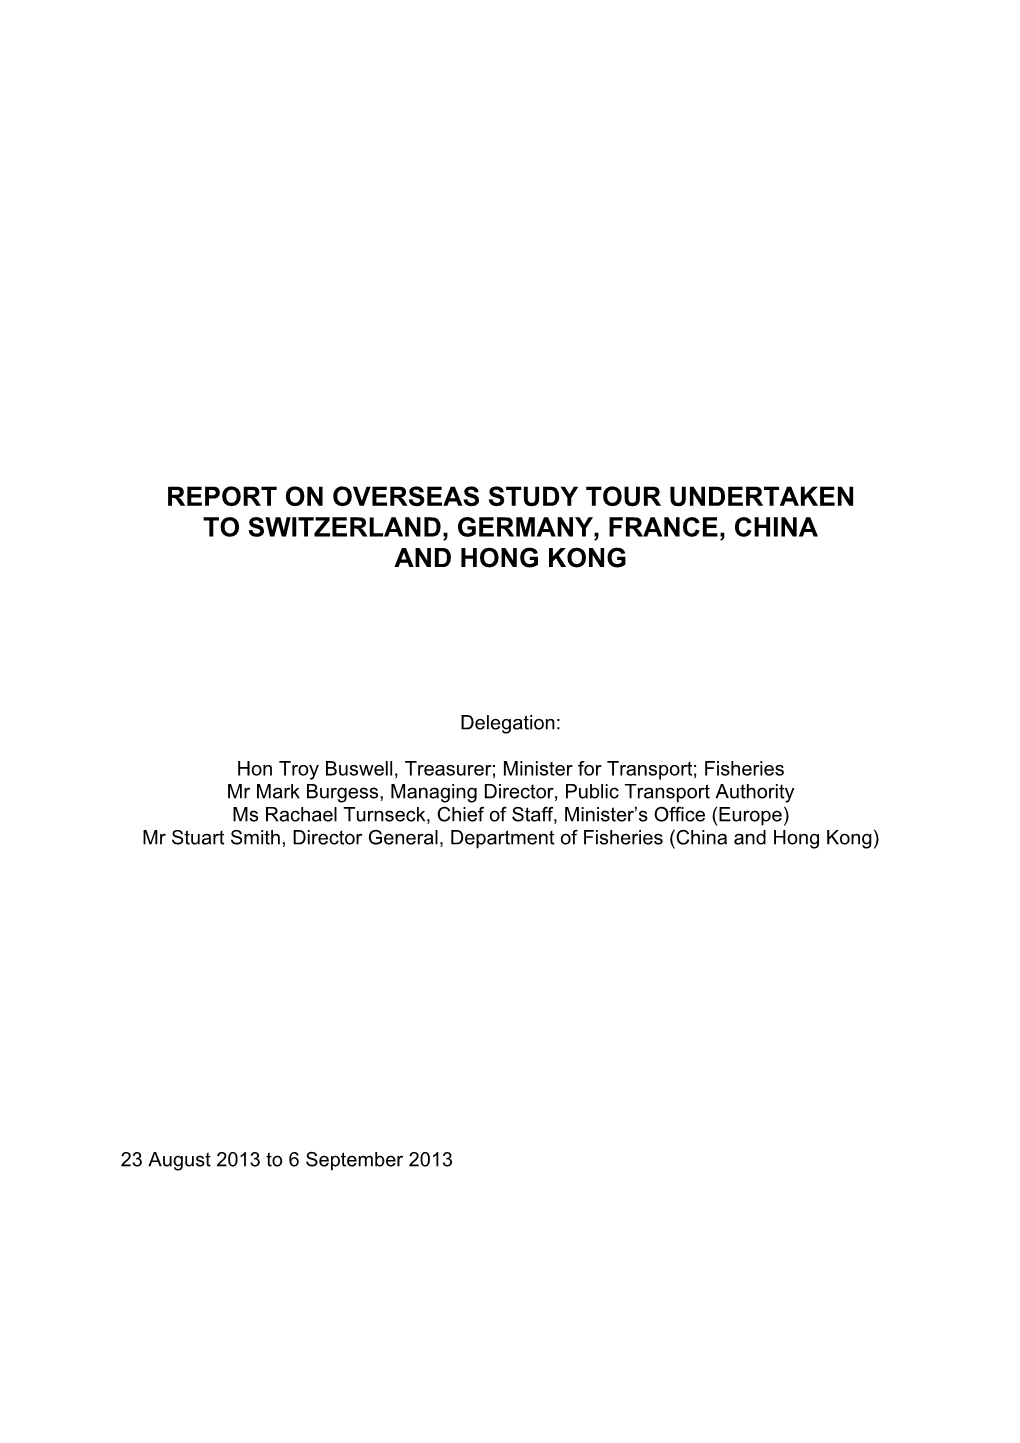 Report on Overseas Study Tour Undertaken to Switzerland, Germany, France, China and Hong Kong